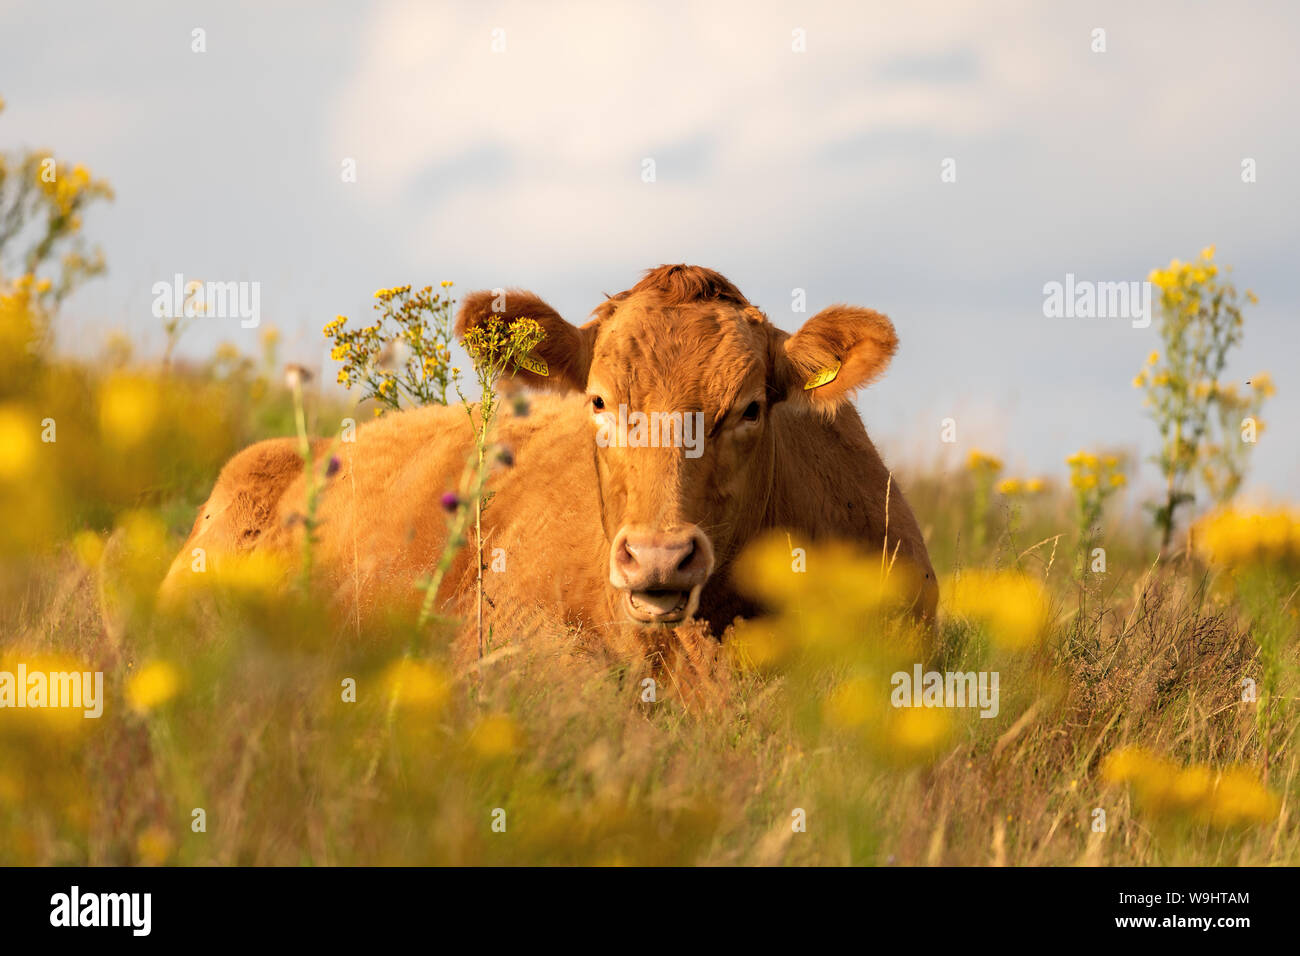 Cow lying down in a pasture of yellow buttercups looking at camera on a hill Stock Photo